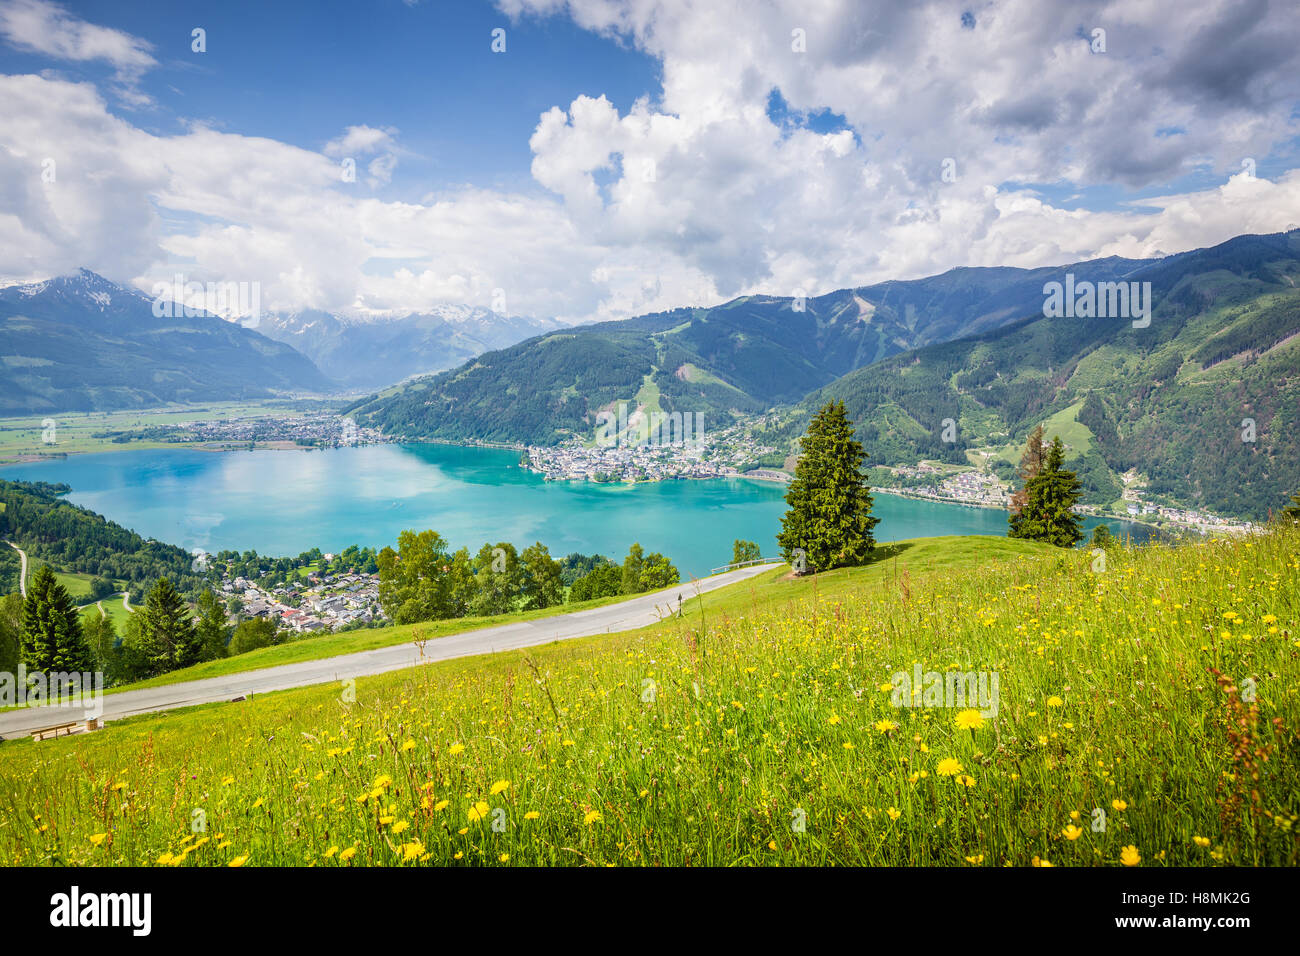 Beautiful mountain scenery in the Alps with clear lake and meadows full of blooming flowers in summer, Zell am See, Austria Stock Photo